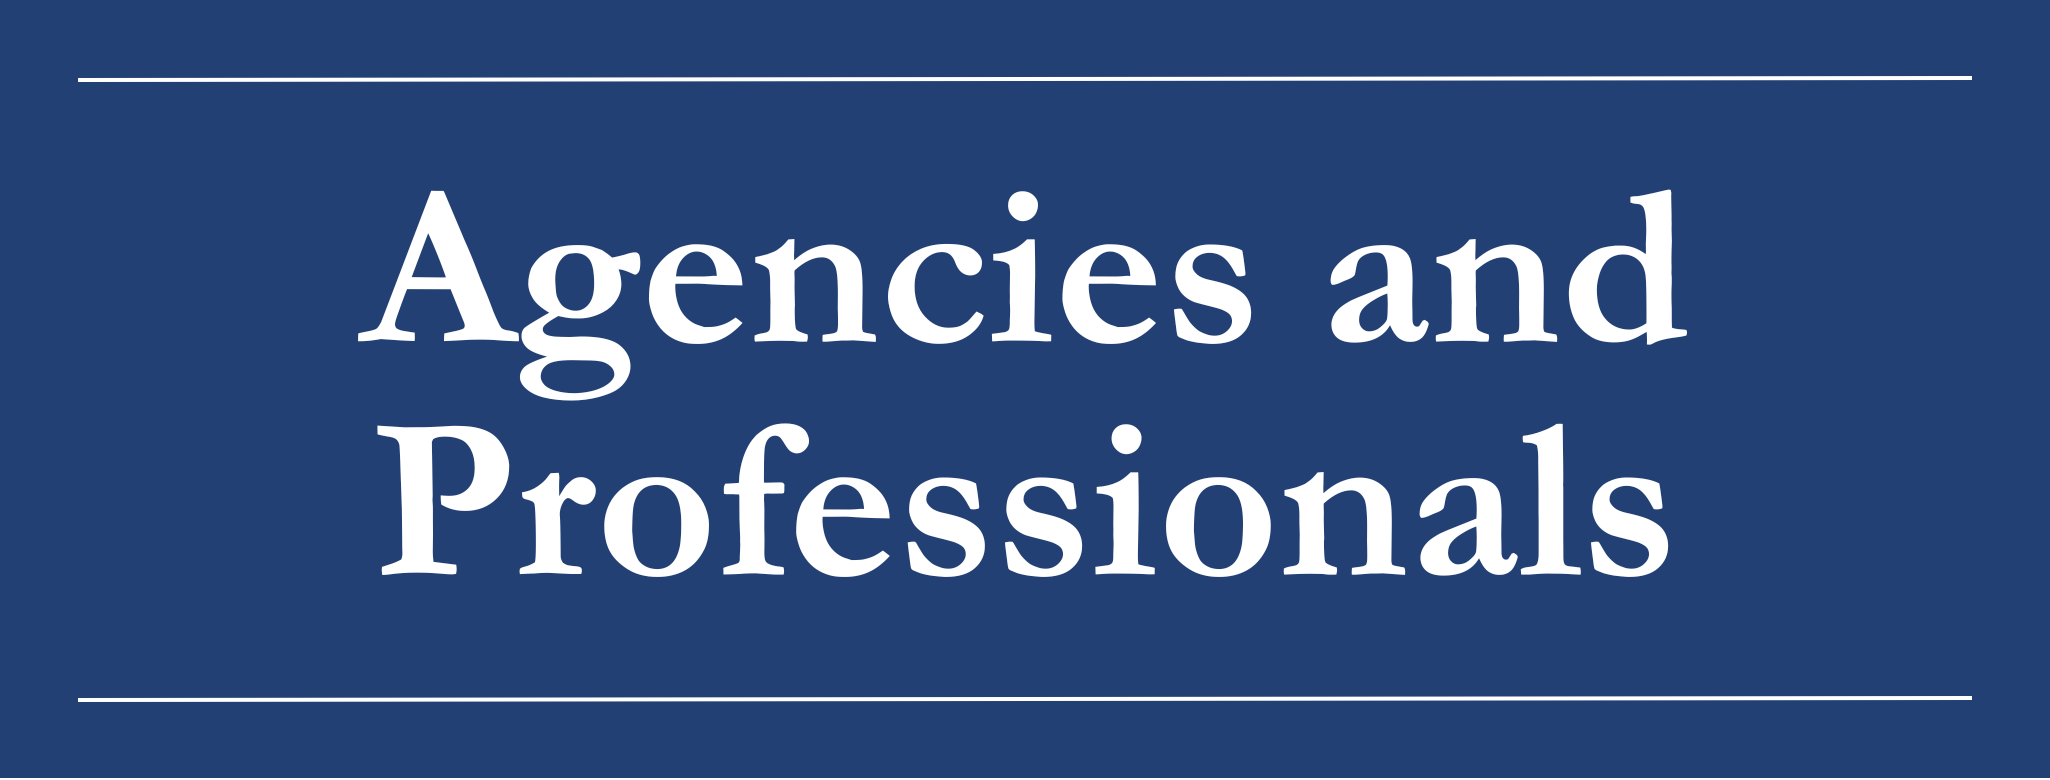 Agencies and Professionals Email